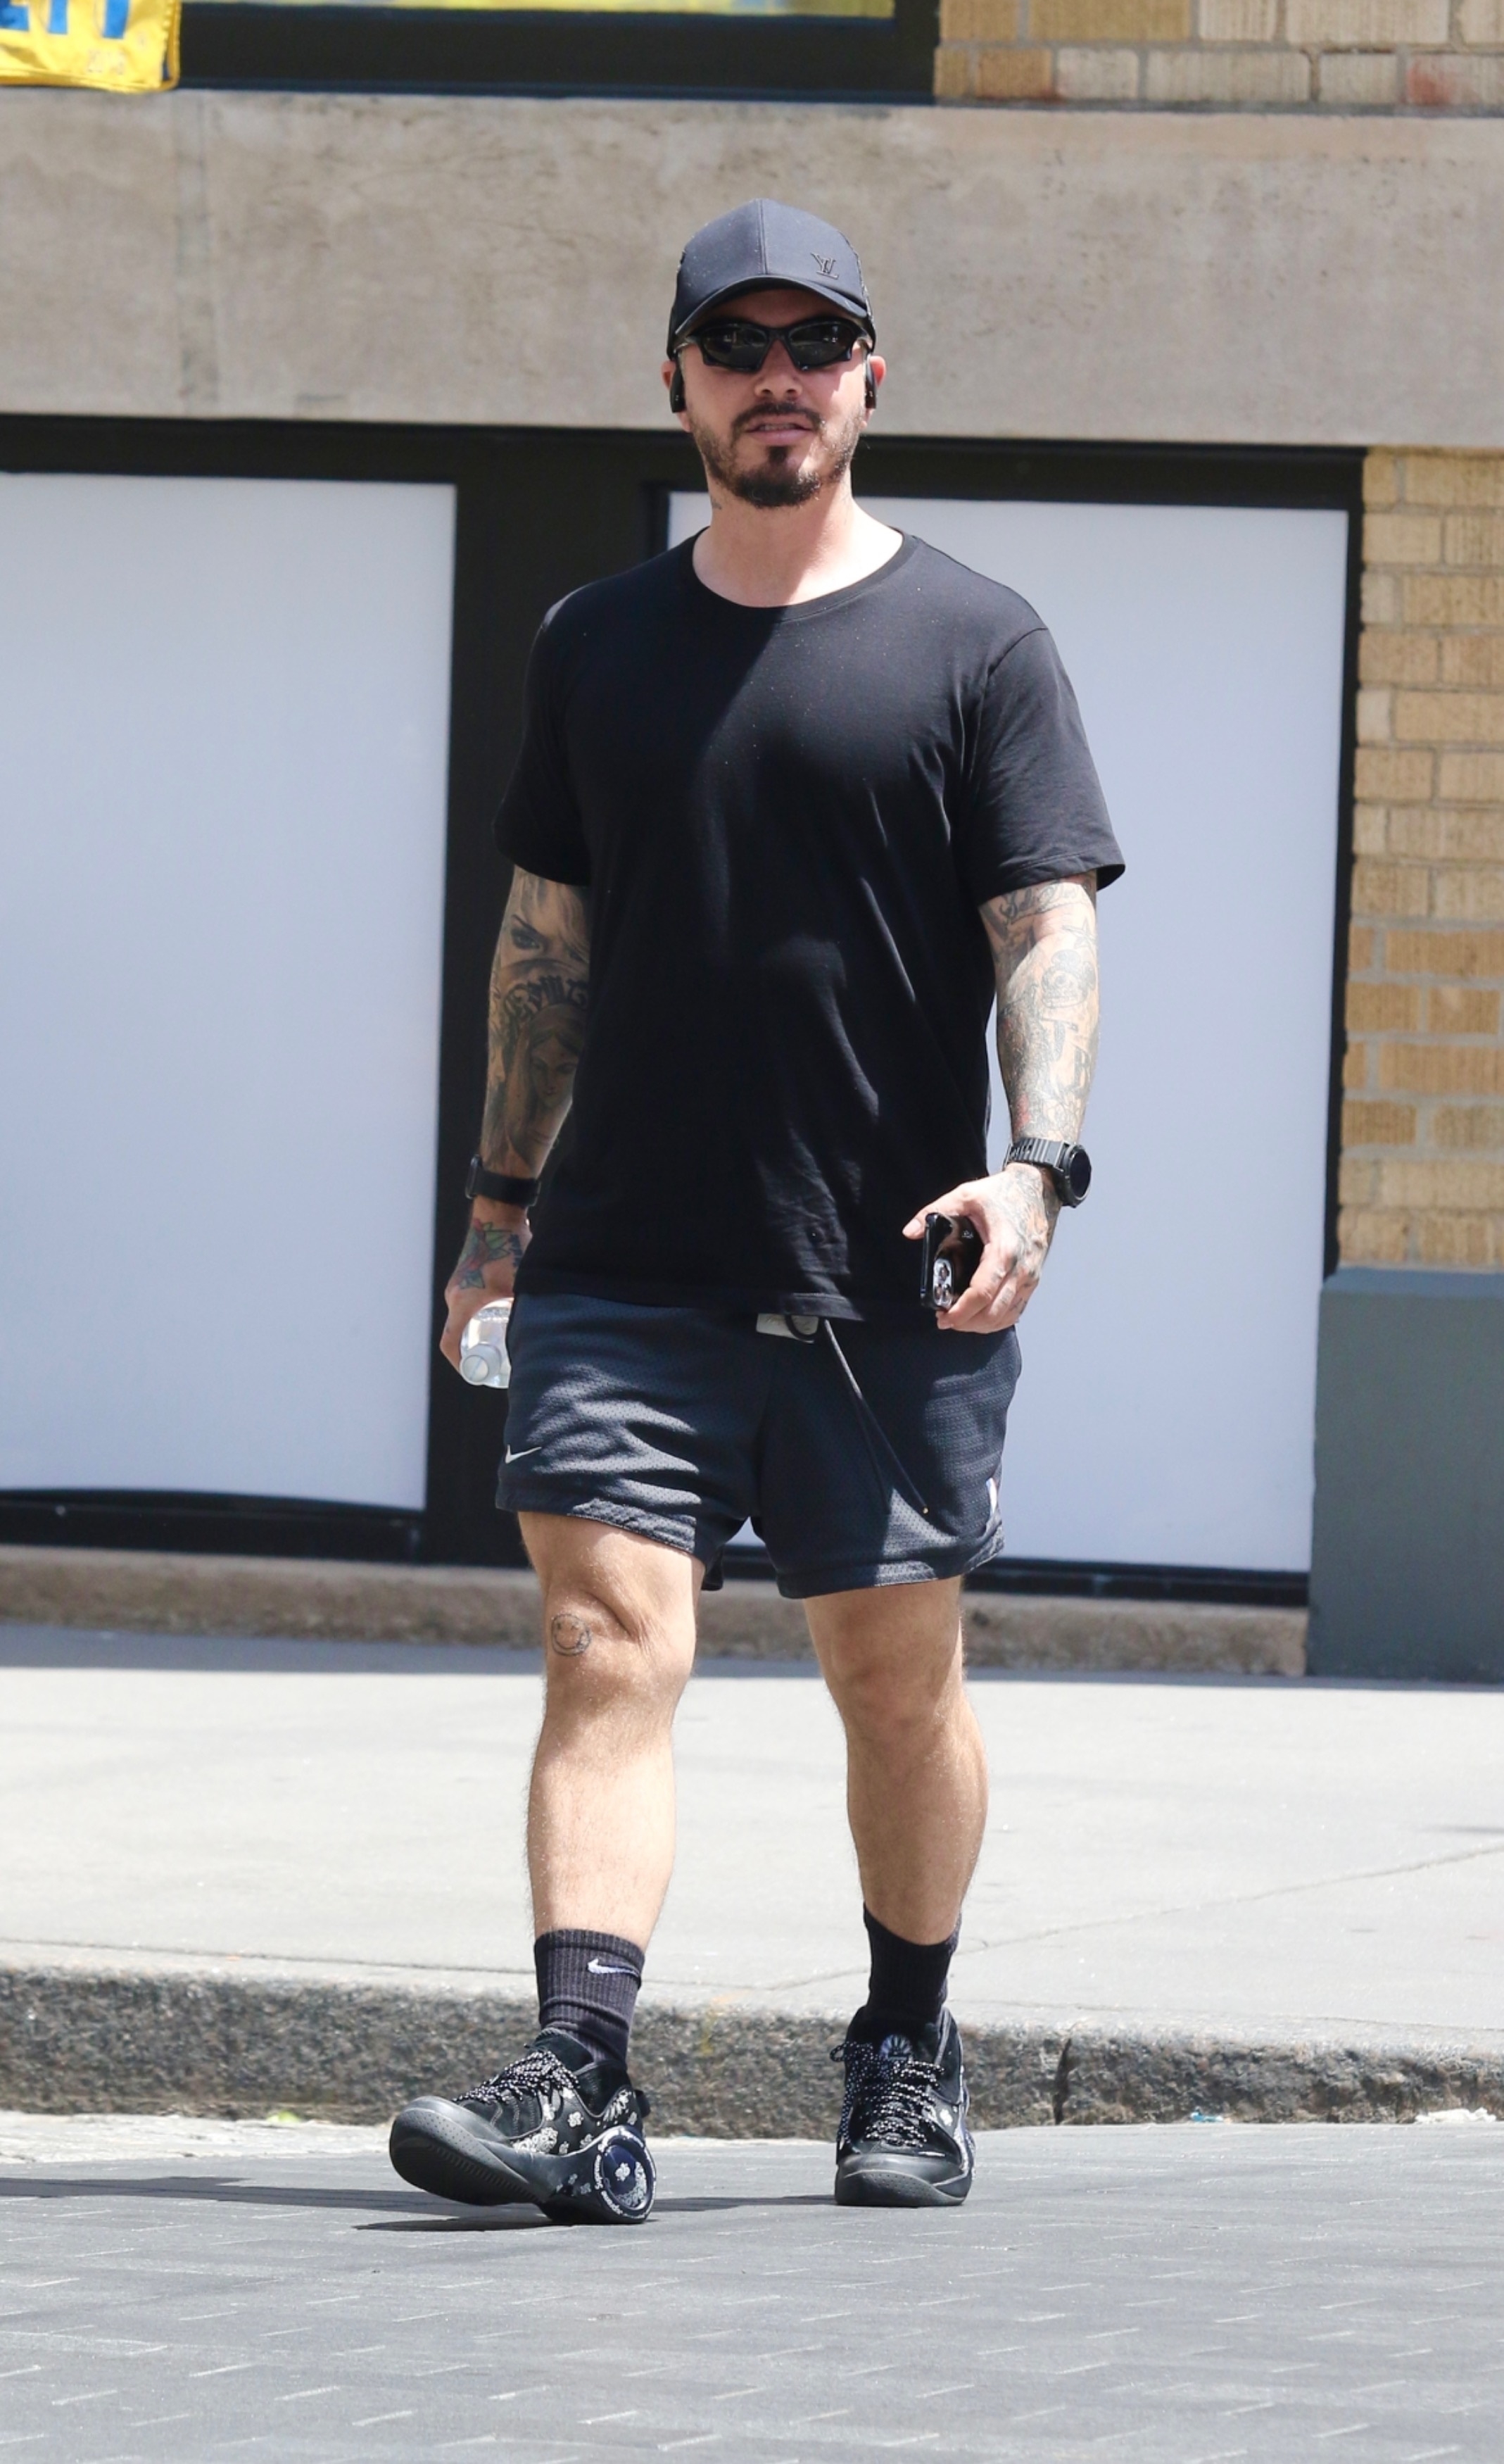 Training Day.  J Balvin was photographed when he left a private gym in the Soho neighborhood in New York.  The musician wore a black sports set of shorts and a T-shirt and exclusive Supreme sneakers and a Louis Vuitton cap